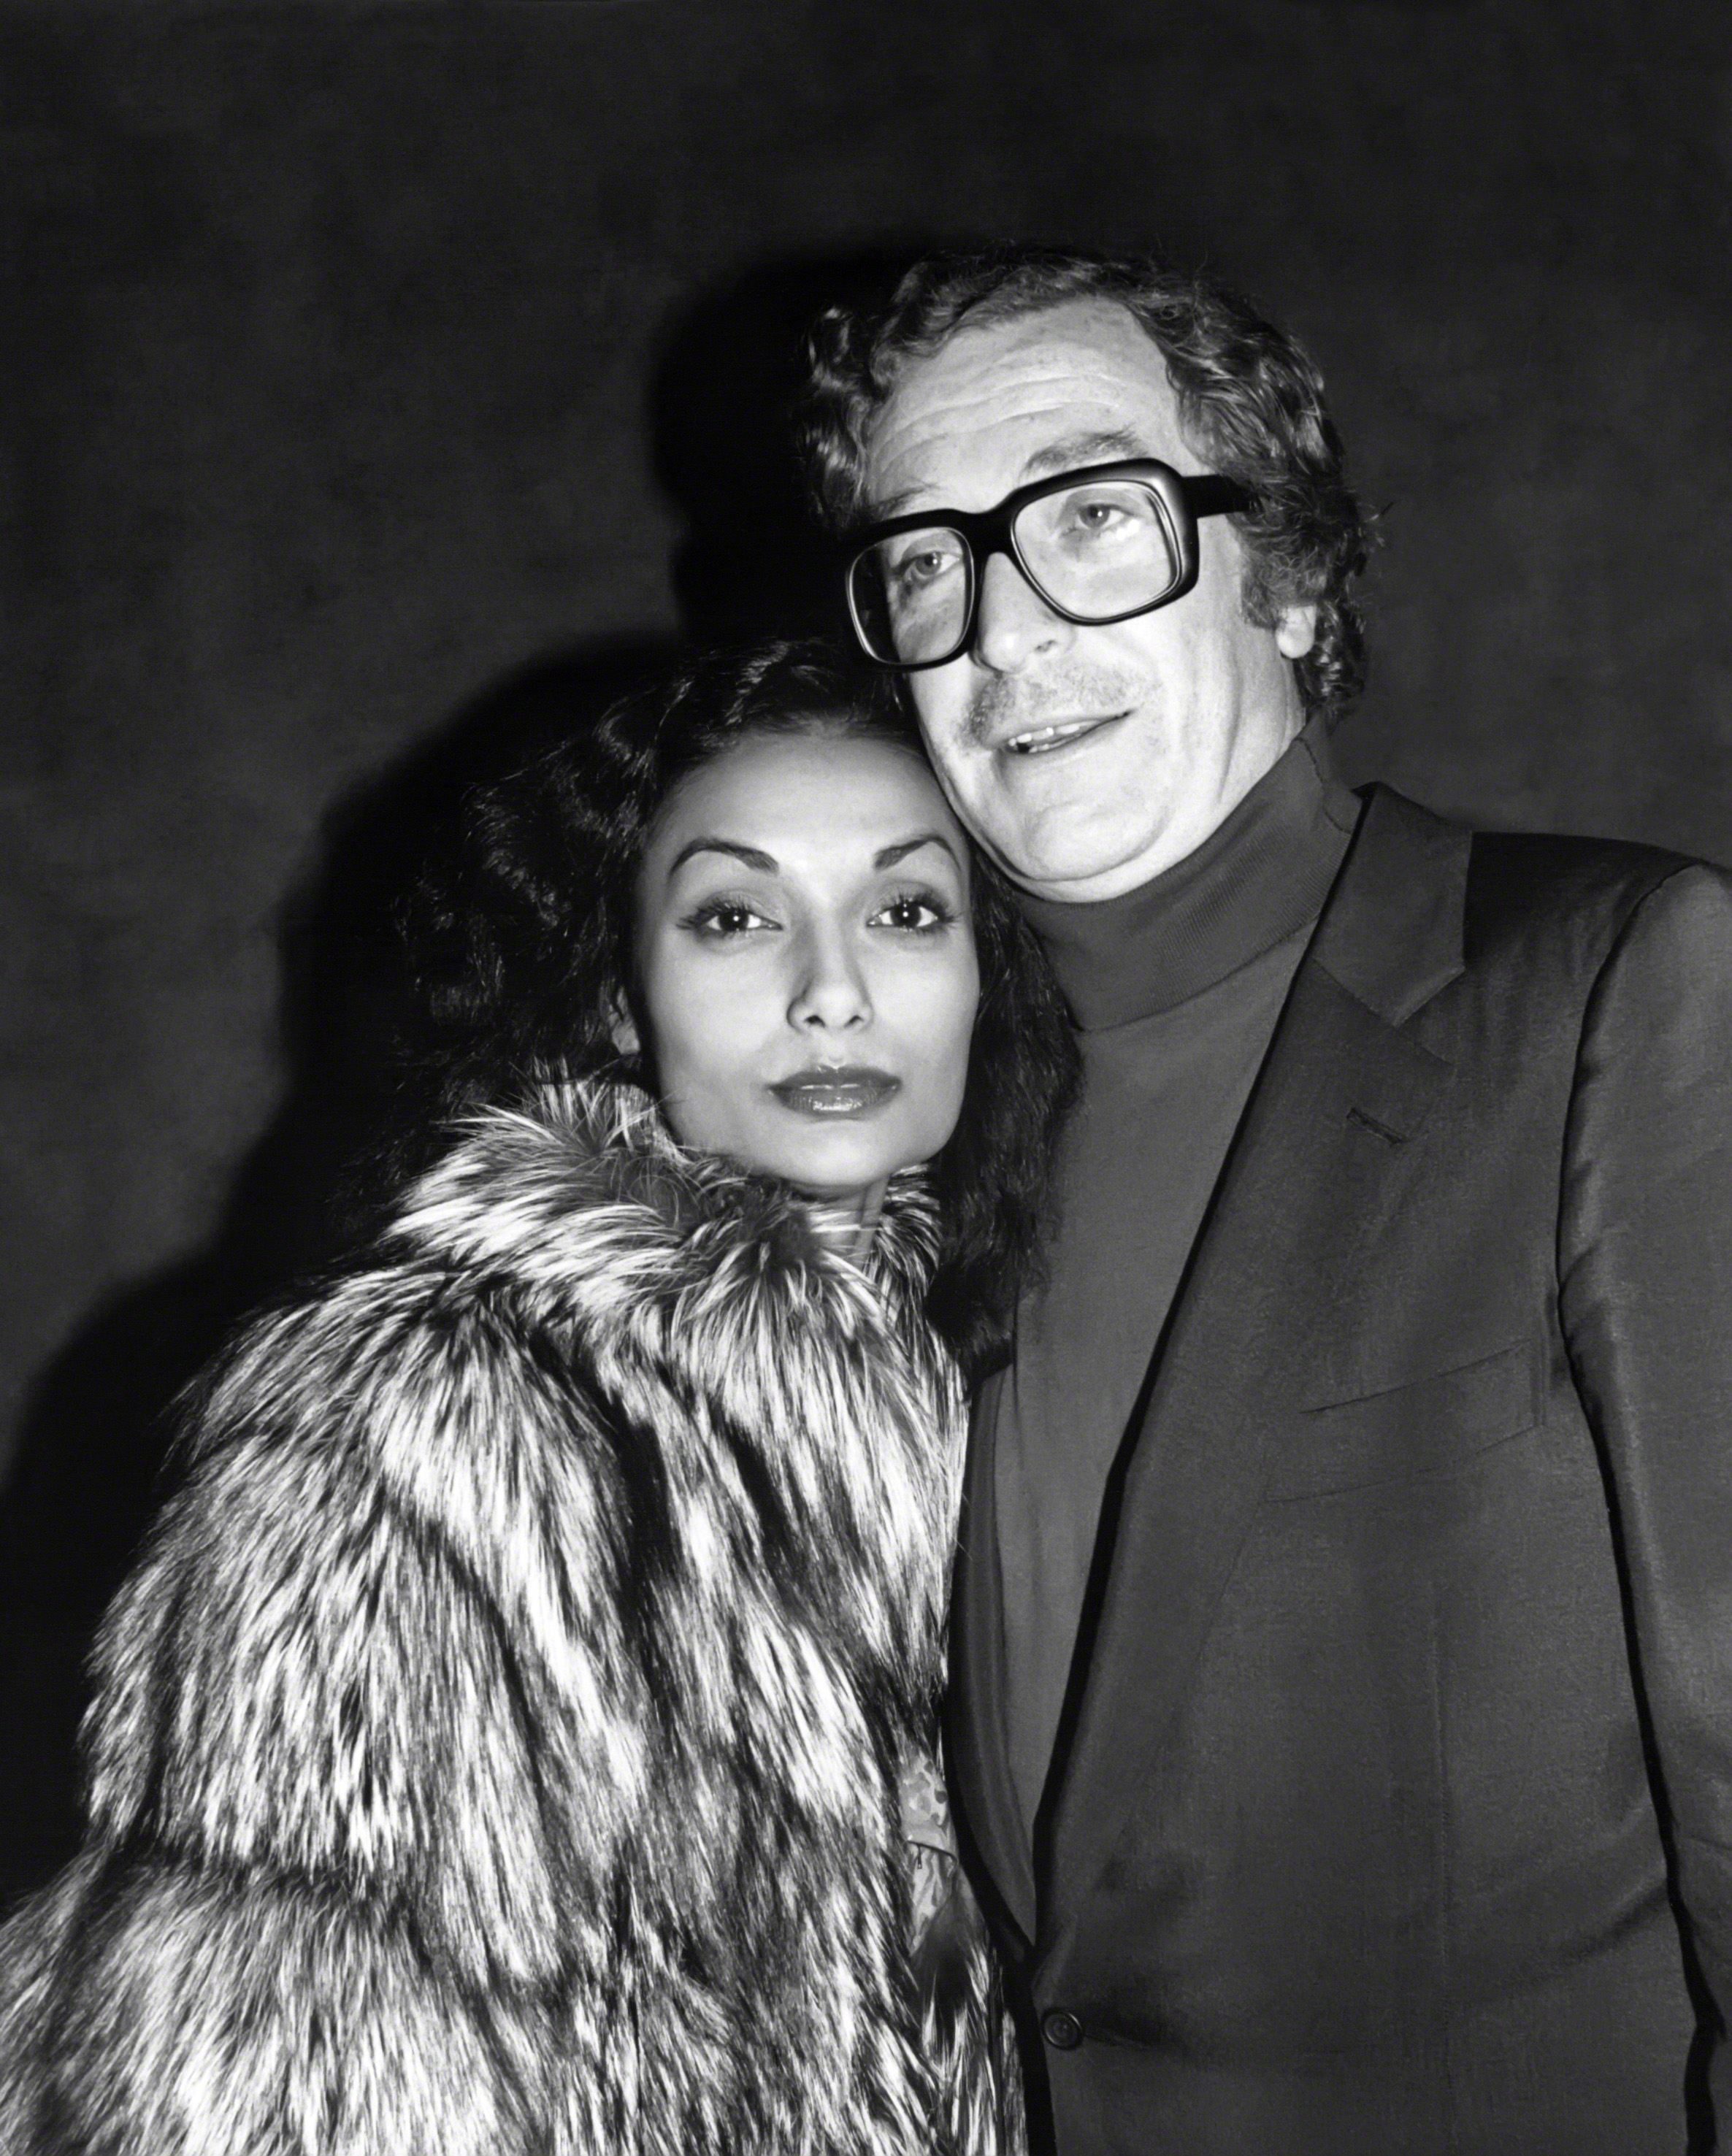 Actor Michael Caine and his wife Shakira circa 1982 in New York City. | Source: Getty Images